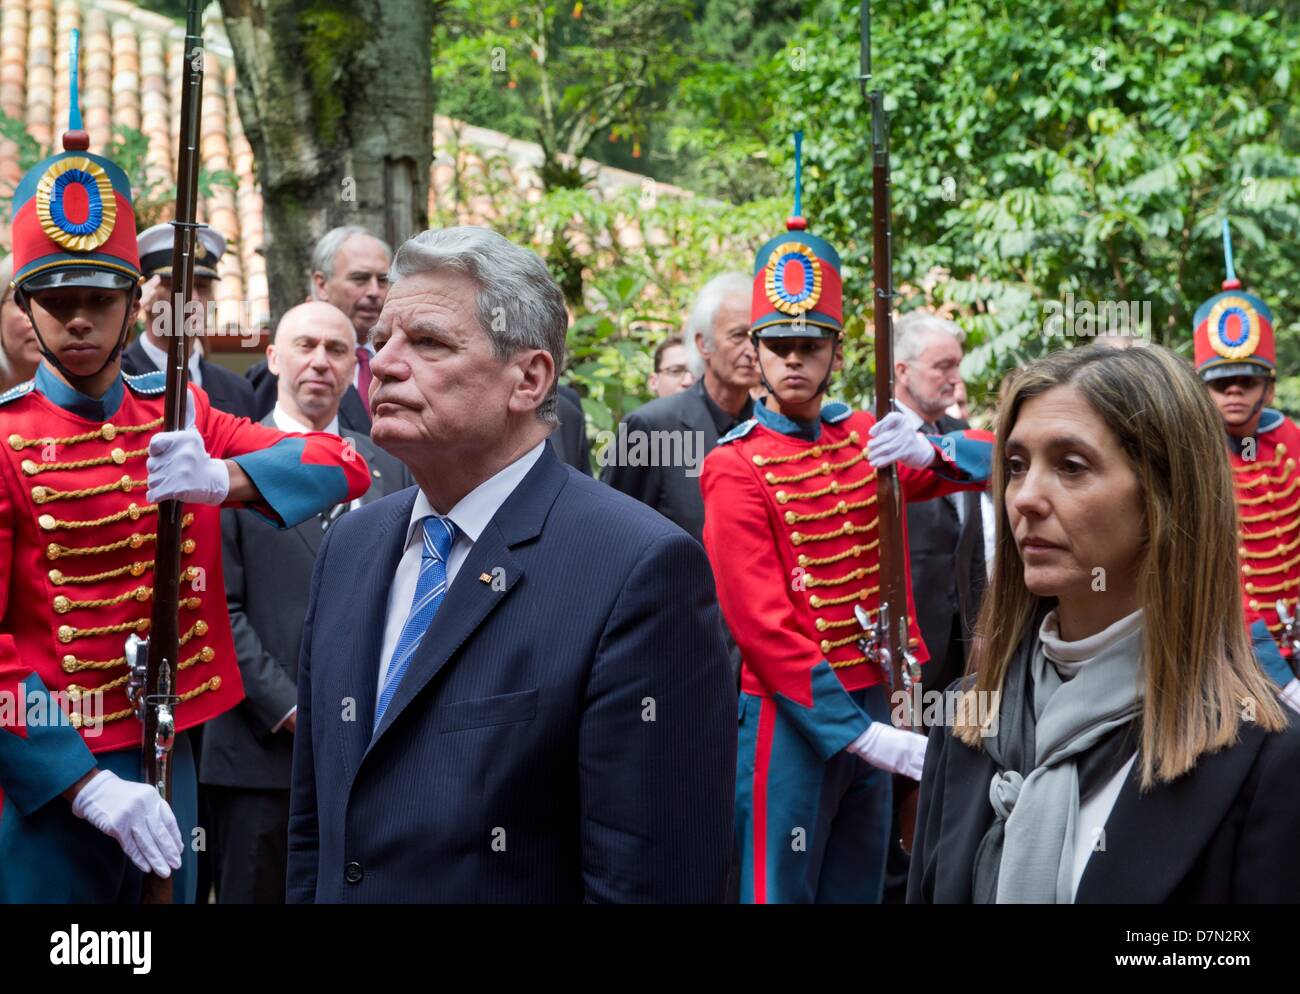 Bogota, Colombia. 10th May 2013. German President Joachim Gauck is welcomed for the wreath laying ceremony by the presidential guard next to Deputy Minister of Multilateral Affairs Patti Londono at the Casa Quinta de Bolivar in Bogota, Colombia, 10 May 2013. The German President is visiting Colombia and Brazil until 17 May 2013. Photo: SOEREN STACHE/dpa/Alamy Live News Stock Photo